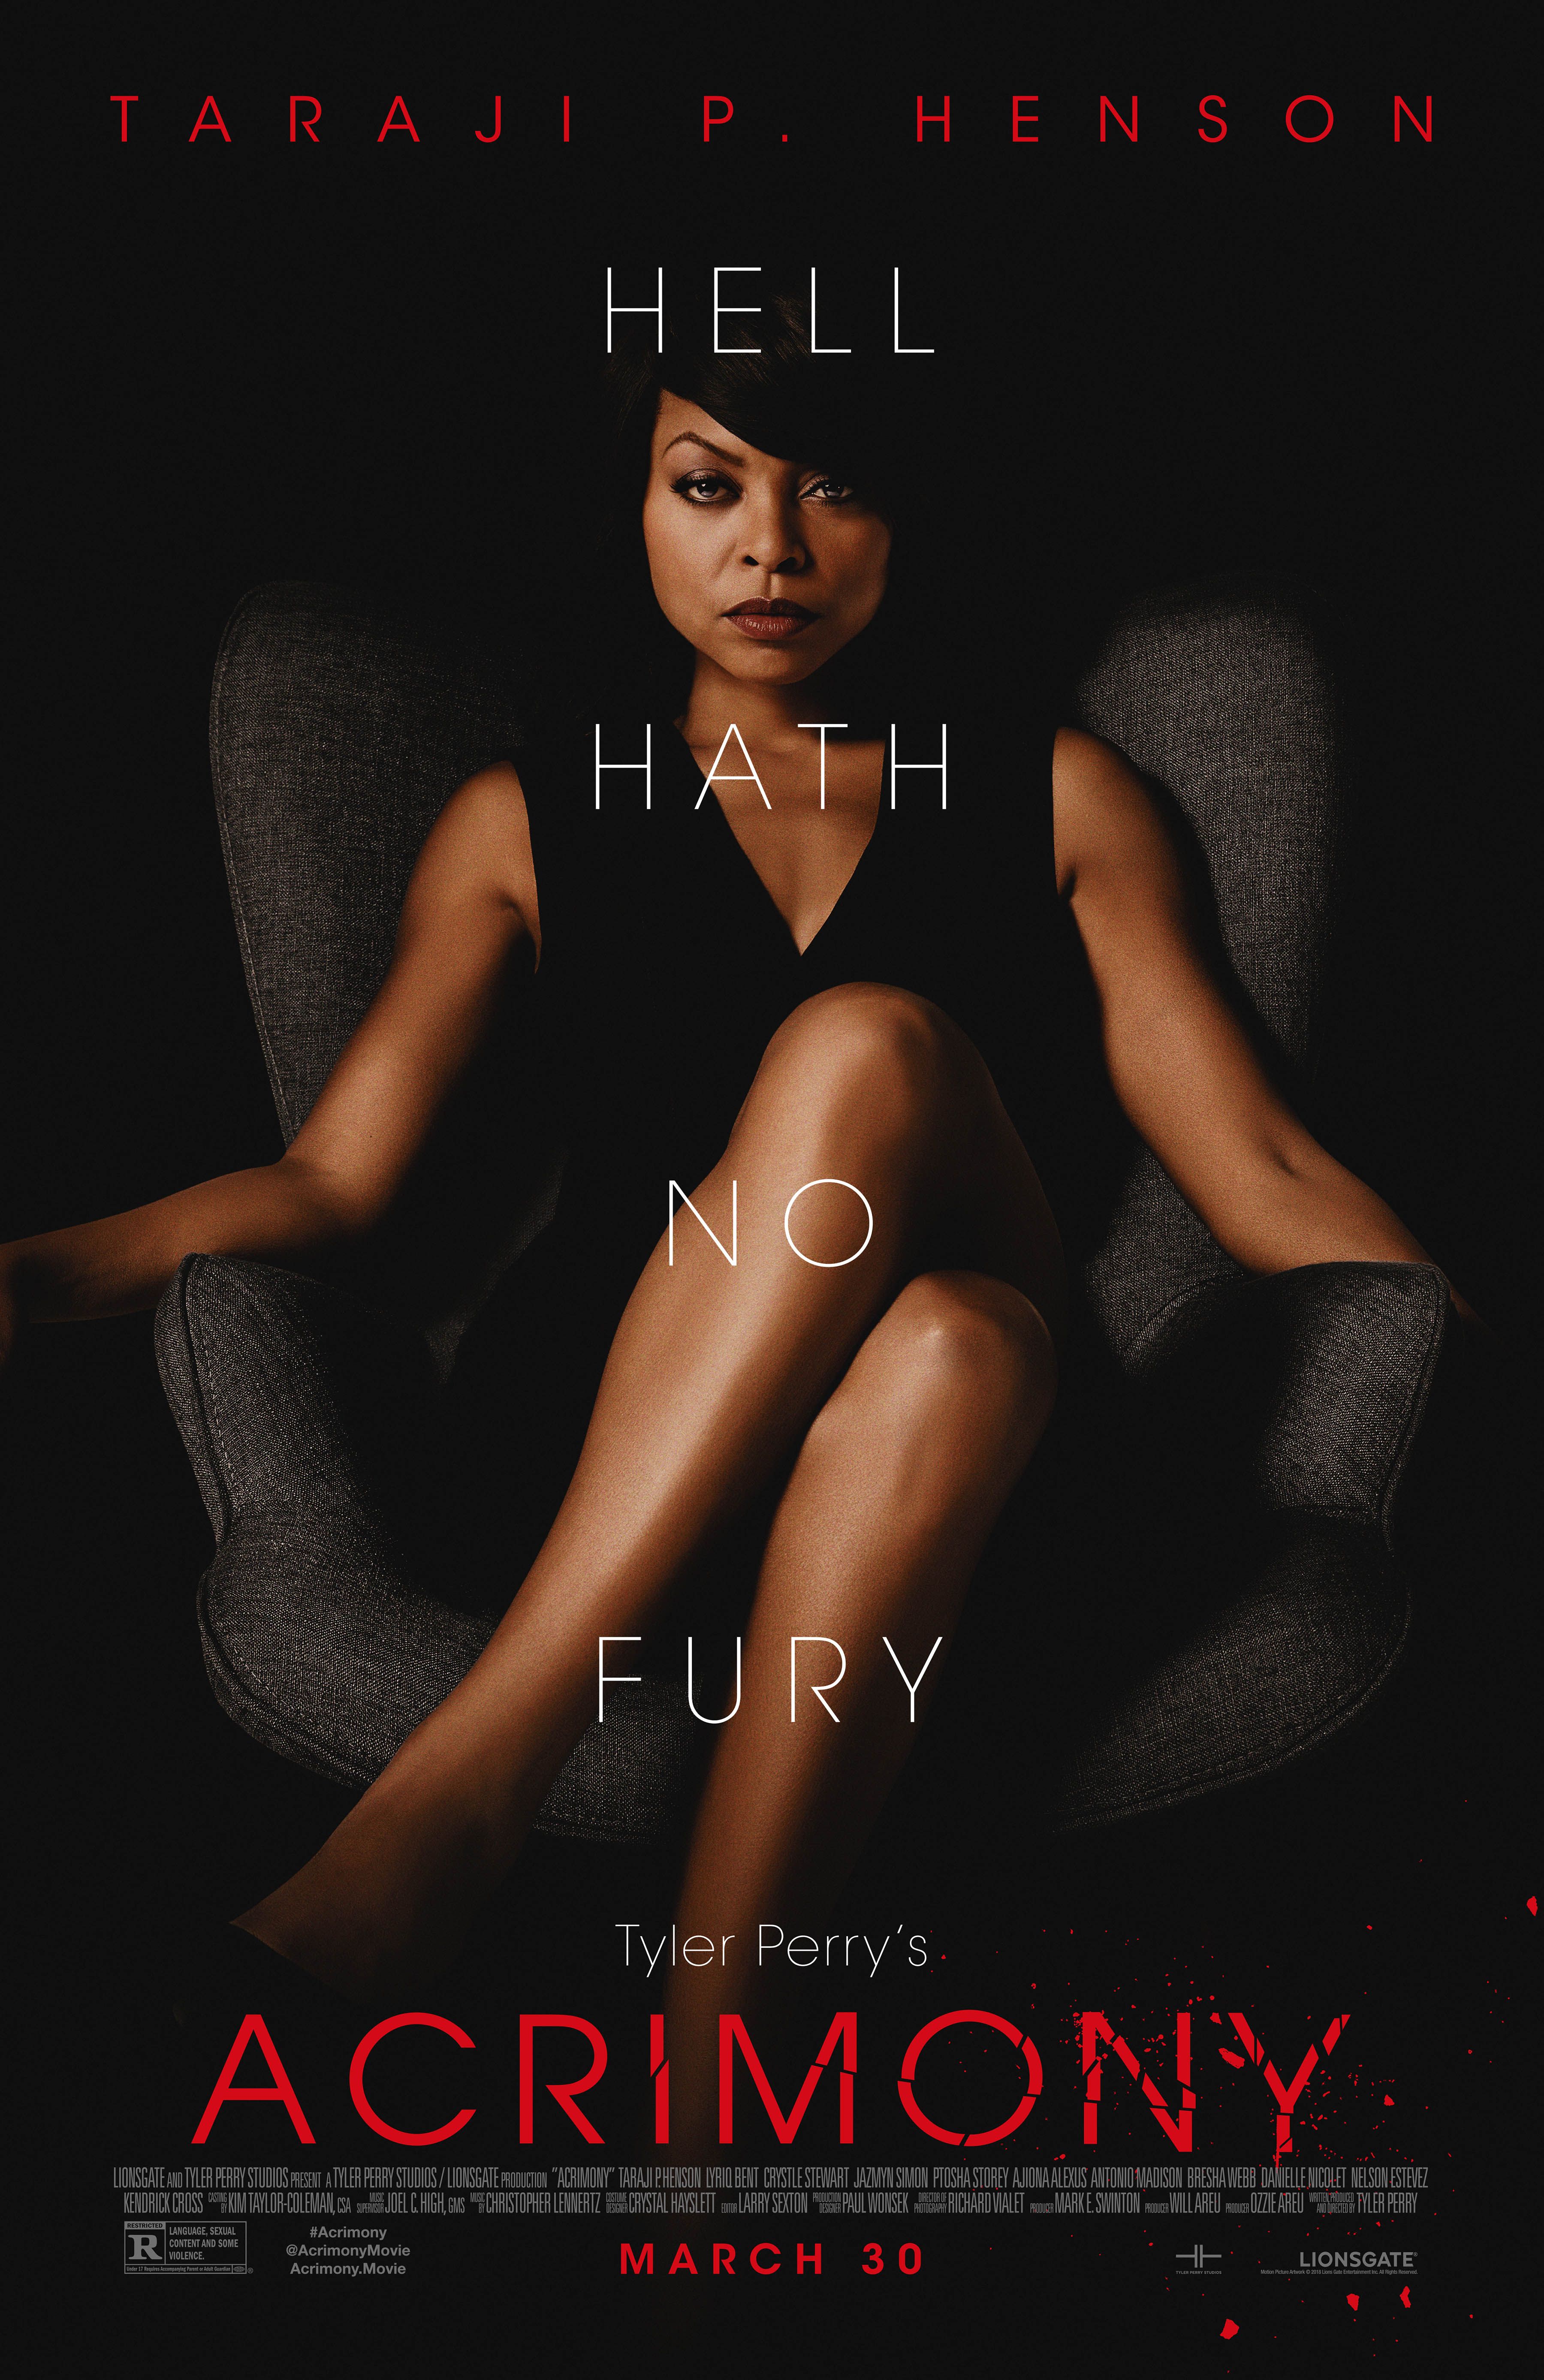 New Acrimony Stills Released But Geek